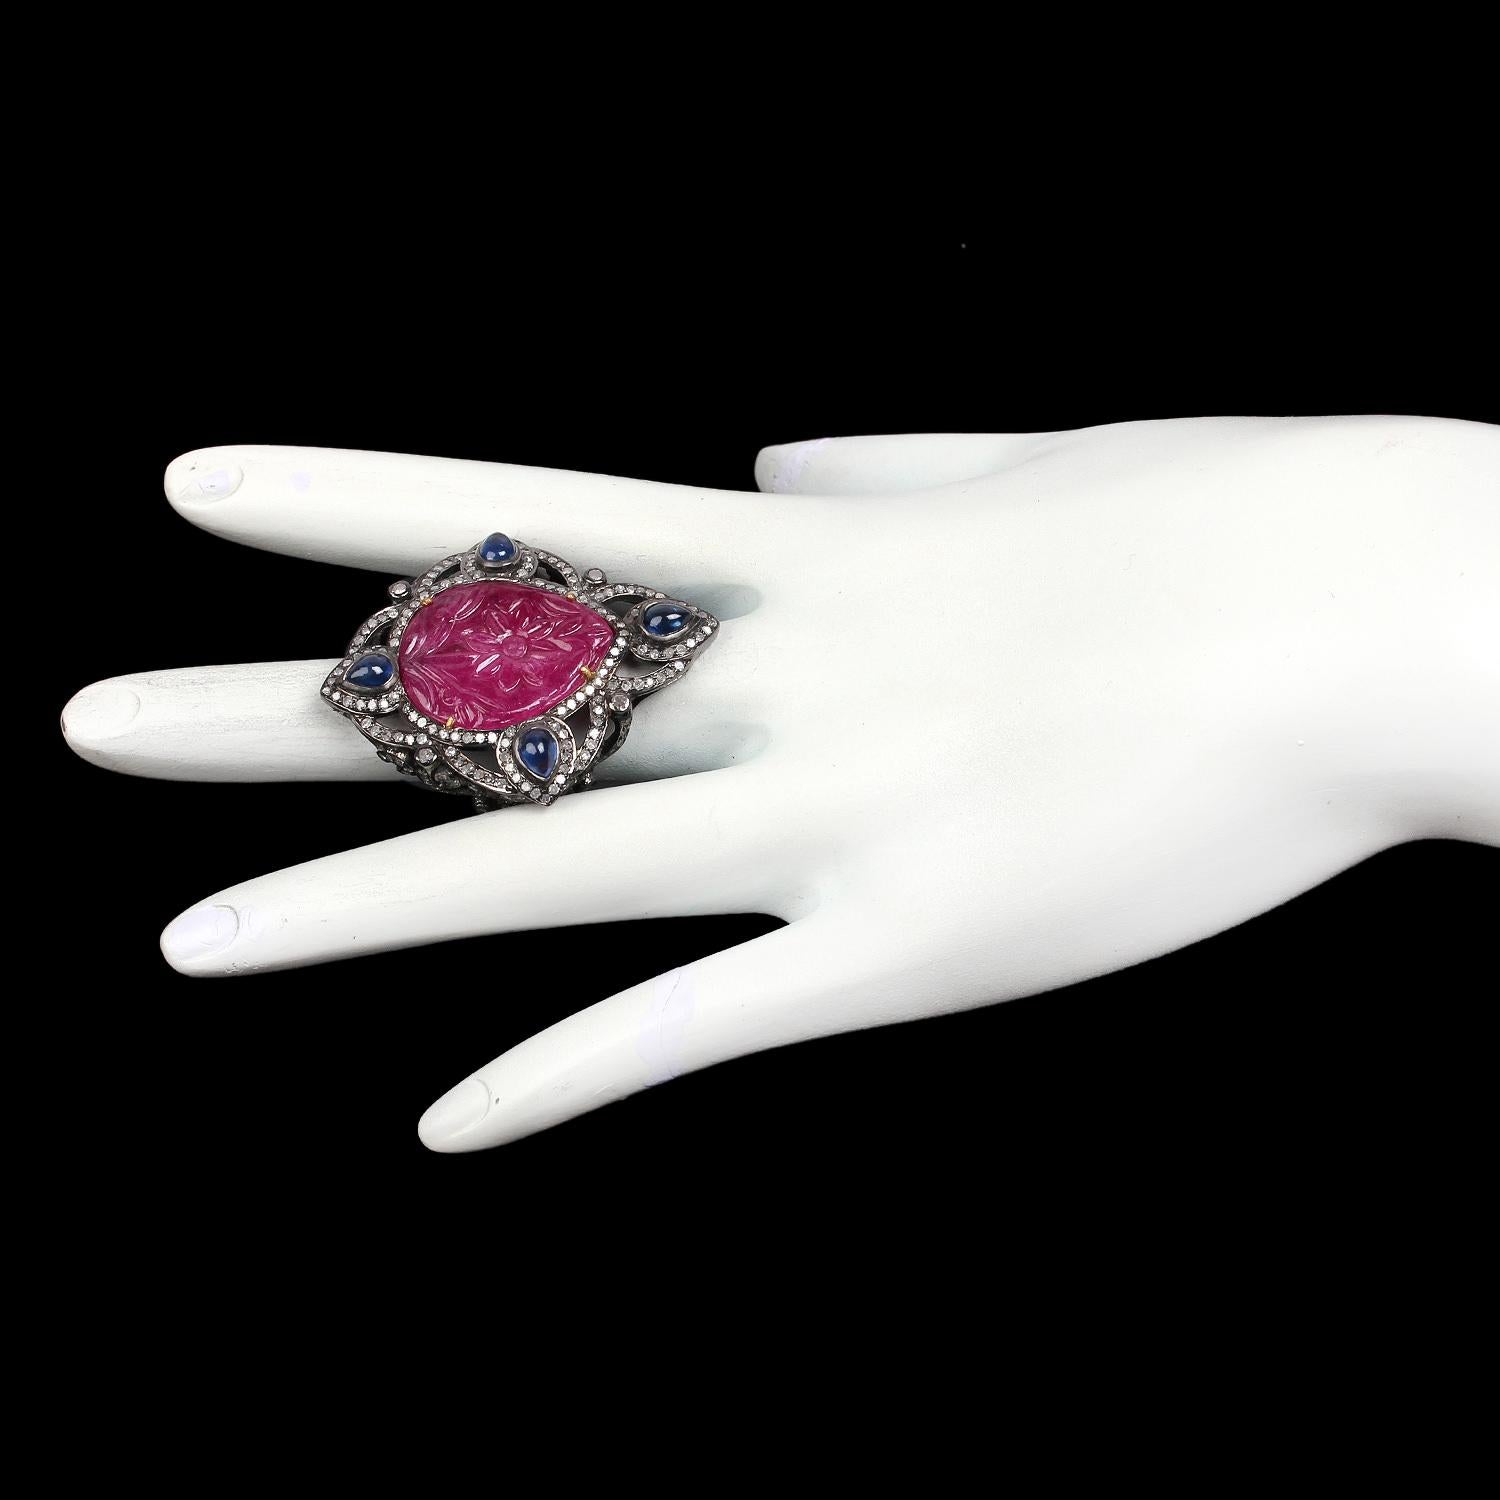 Artisan Hand Carved Ruby Ring with Pave Diamond and Sapphire Set in 18k Gold and Silver